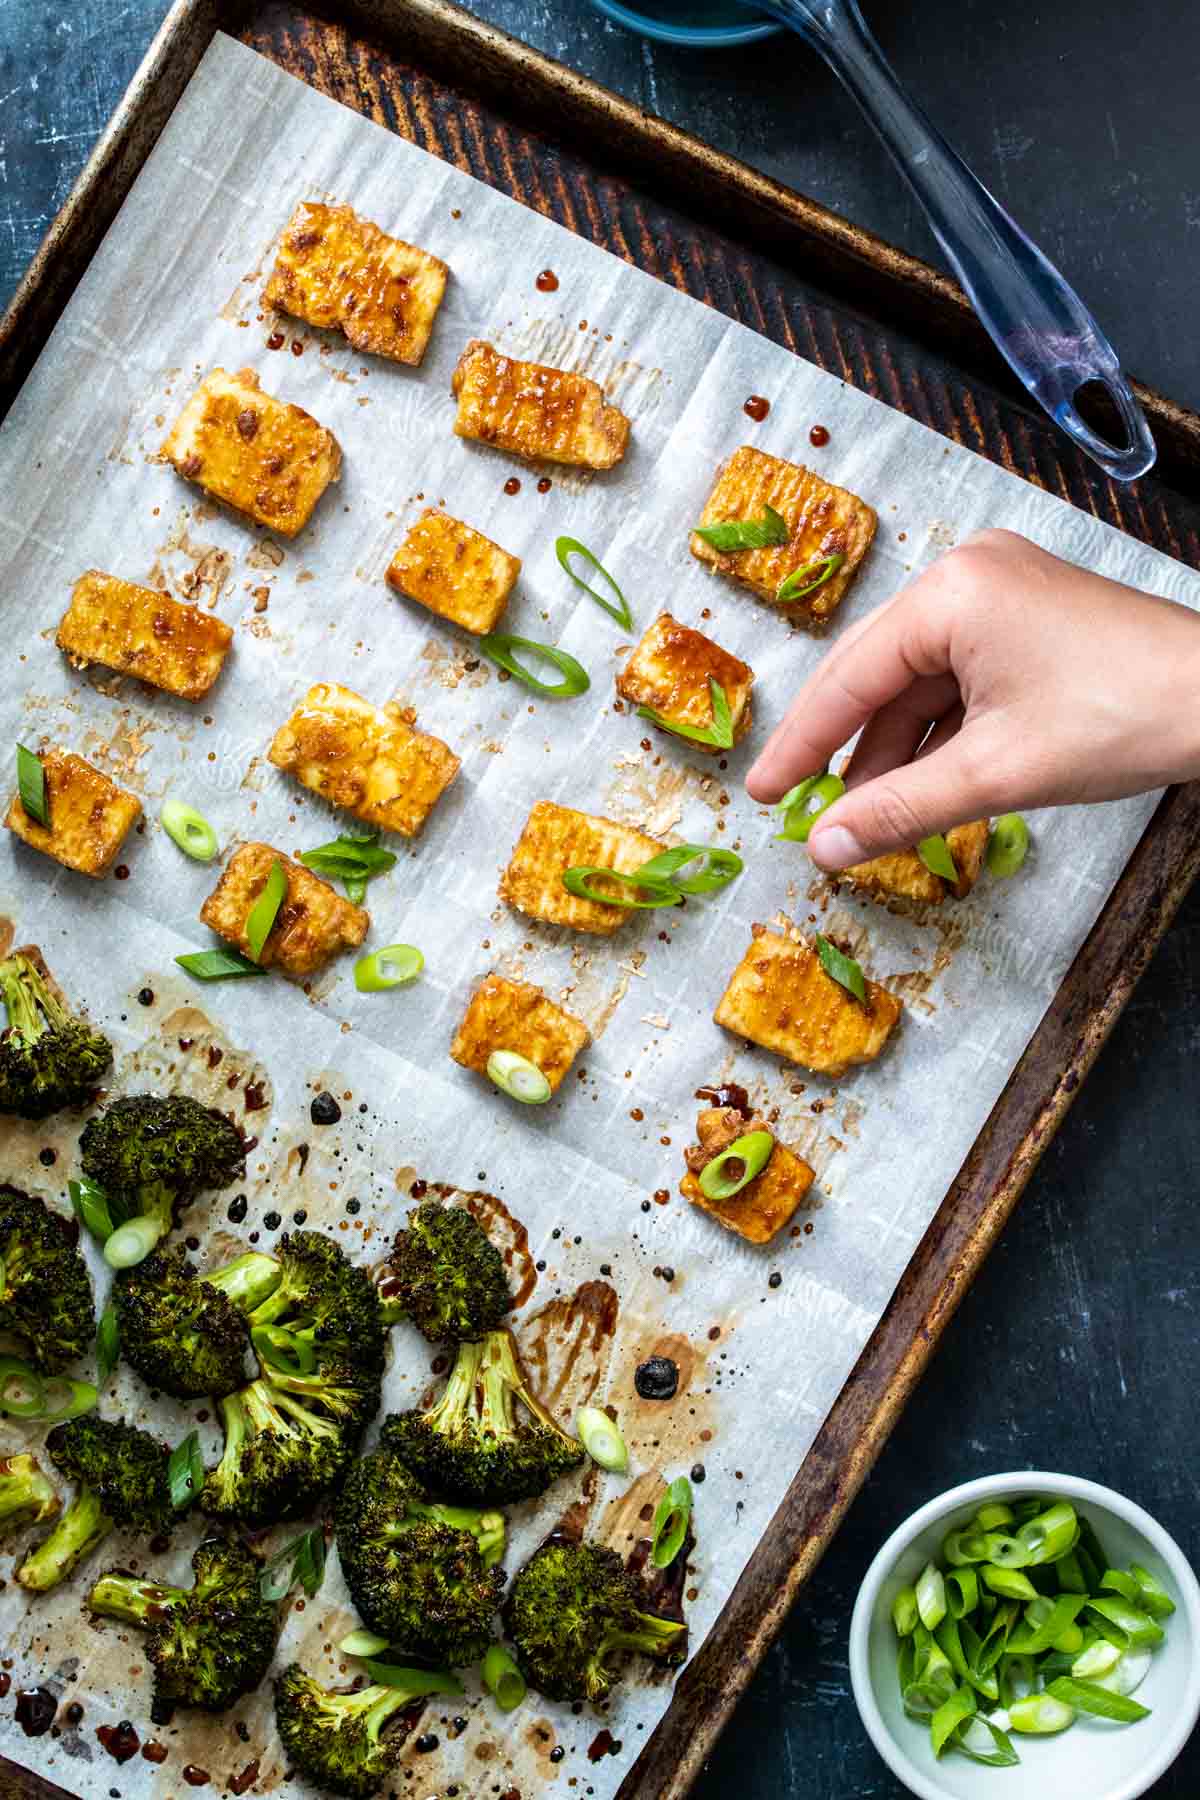 A hand sprinkling sliced green onions over tofu and broccoli pieces that are on a parchment lined baking sheet